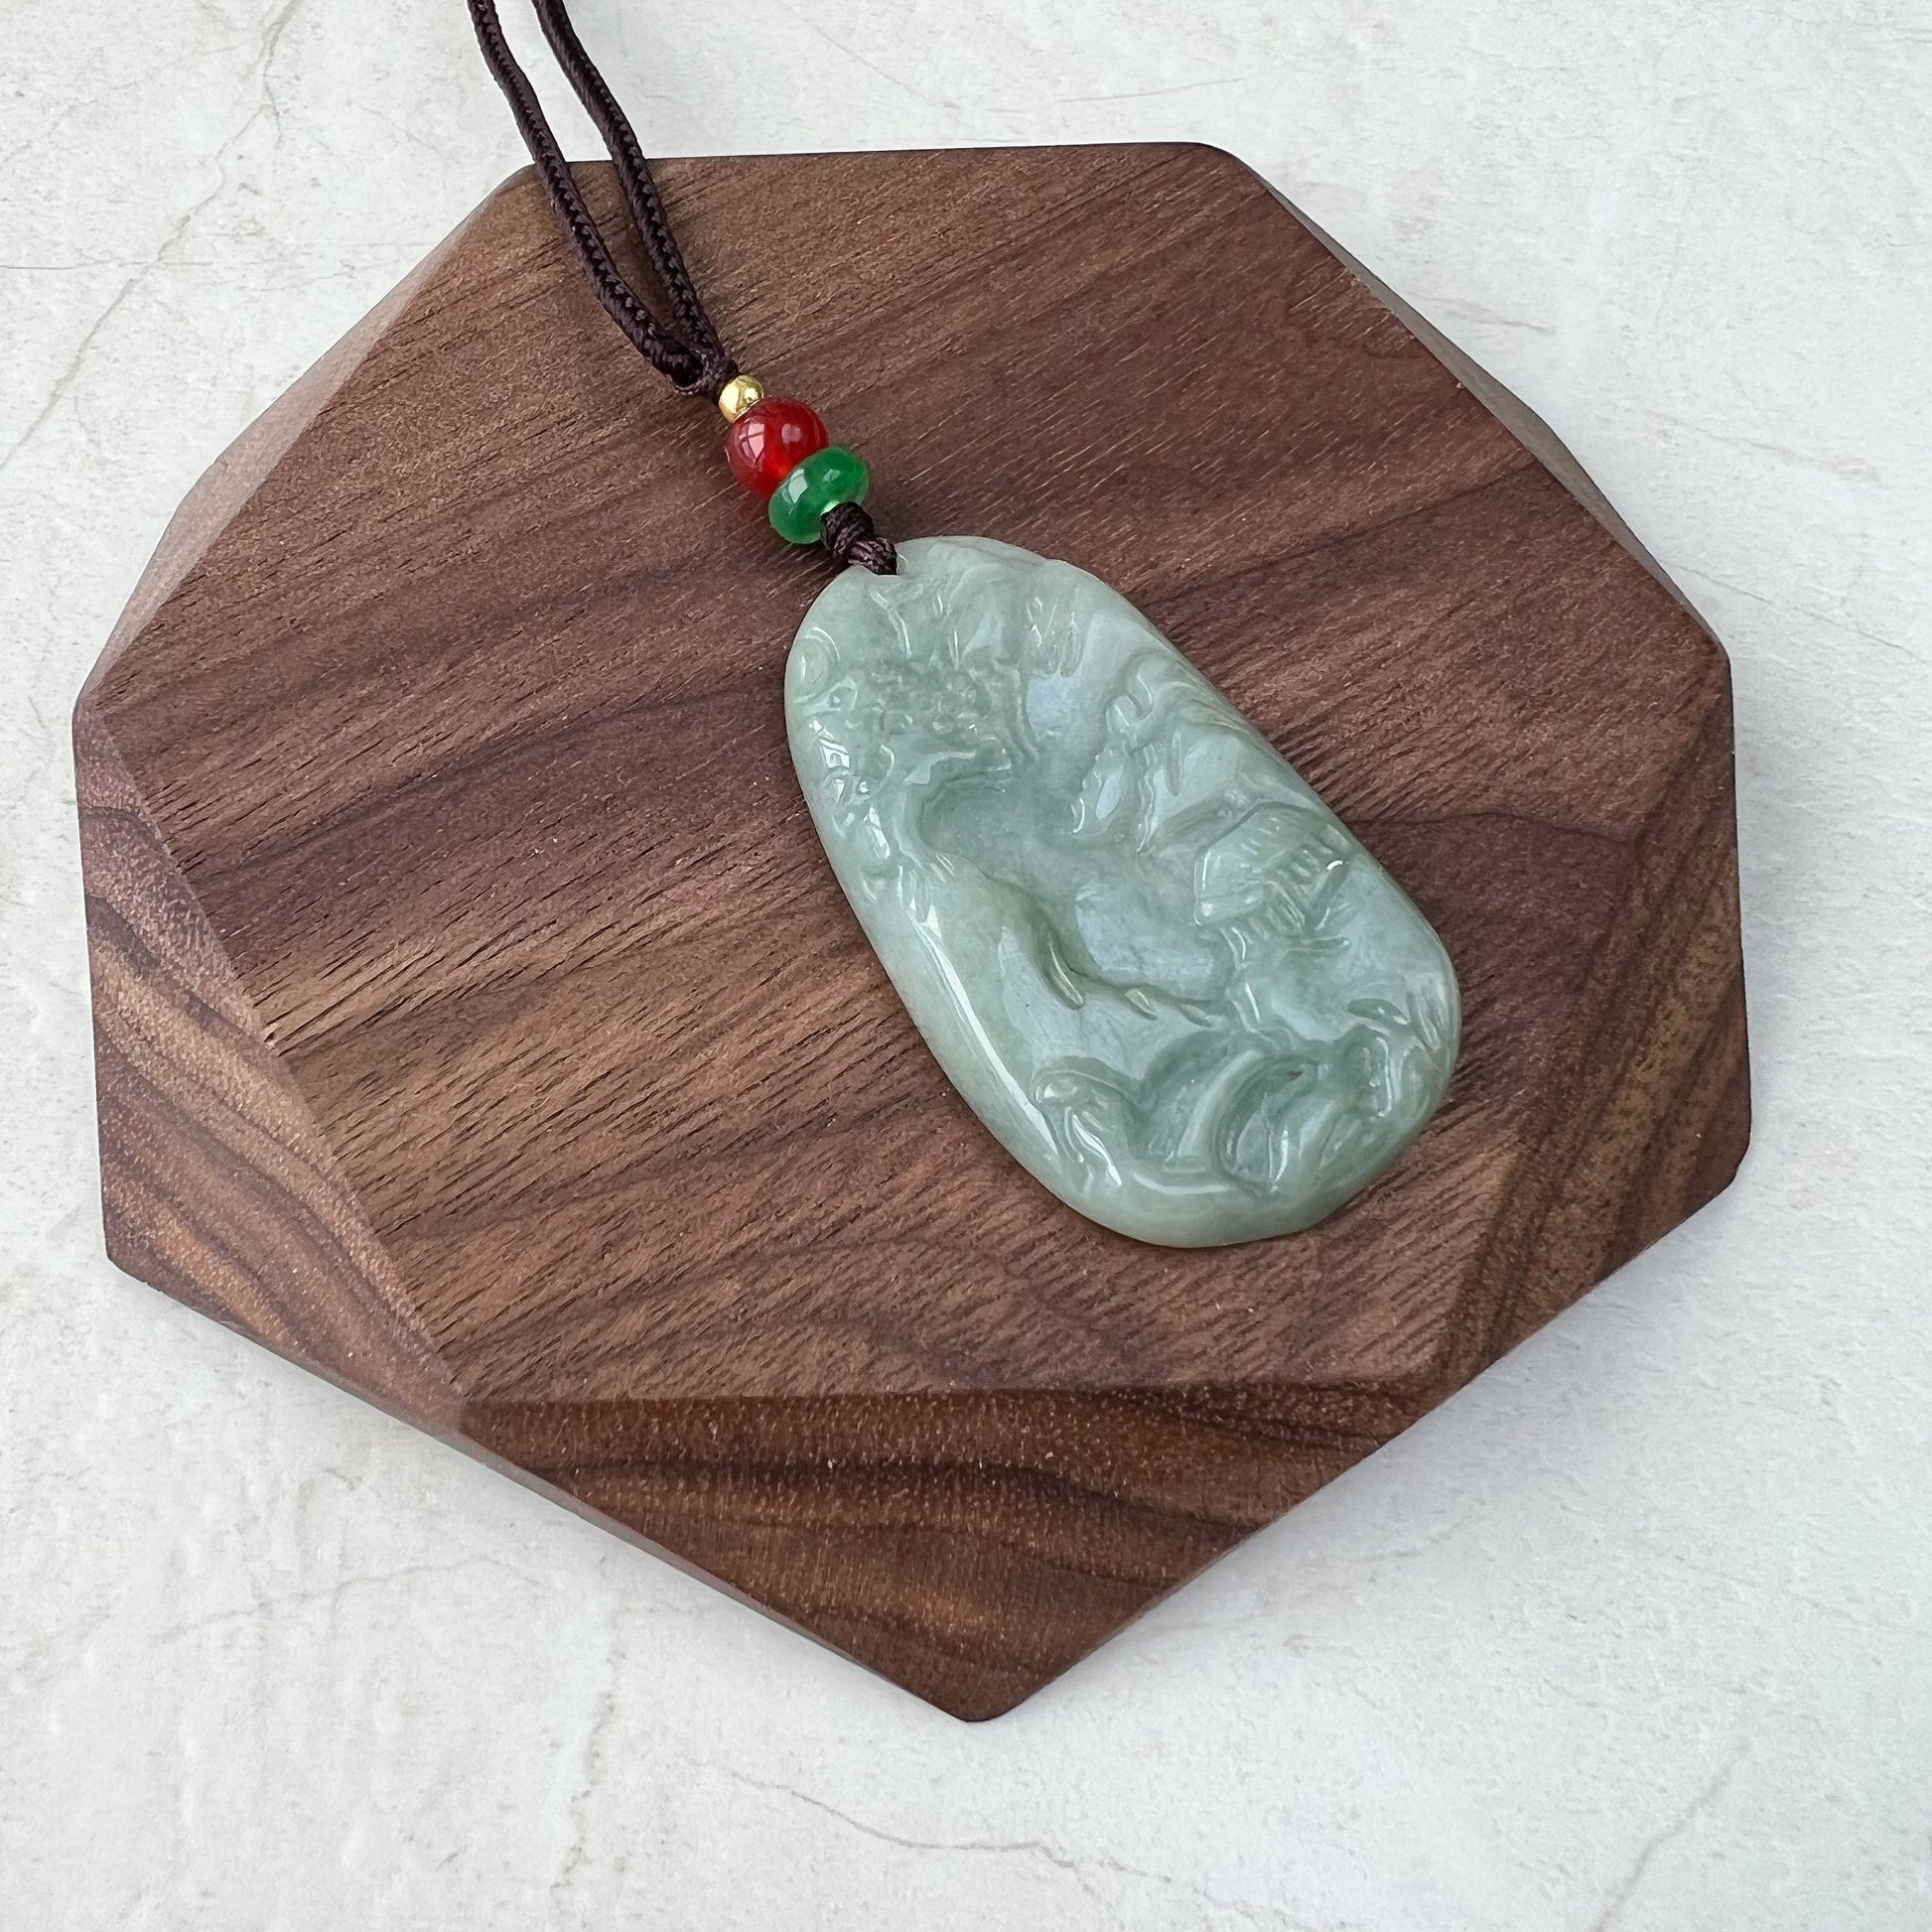 Jadeite Jade Landscape Mountain Forest River Scenery Hand Carved Pendant Necklace, YJ-0921-0166023 - AriaDesignCollection